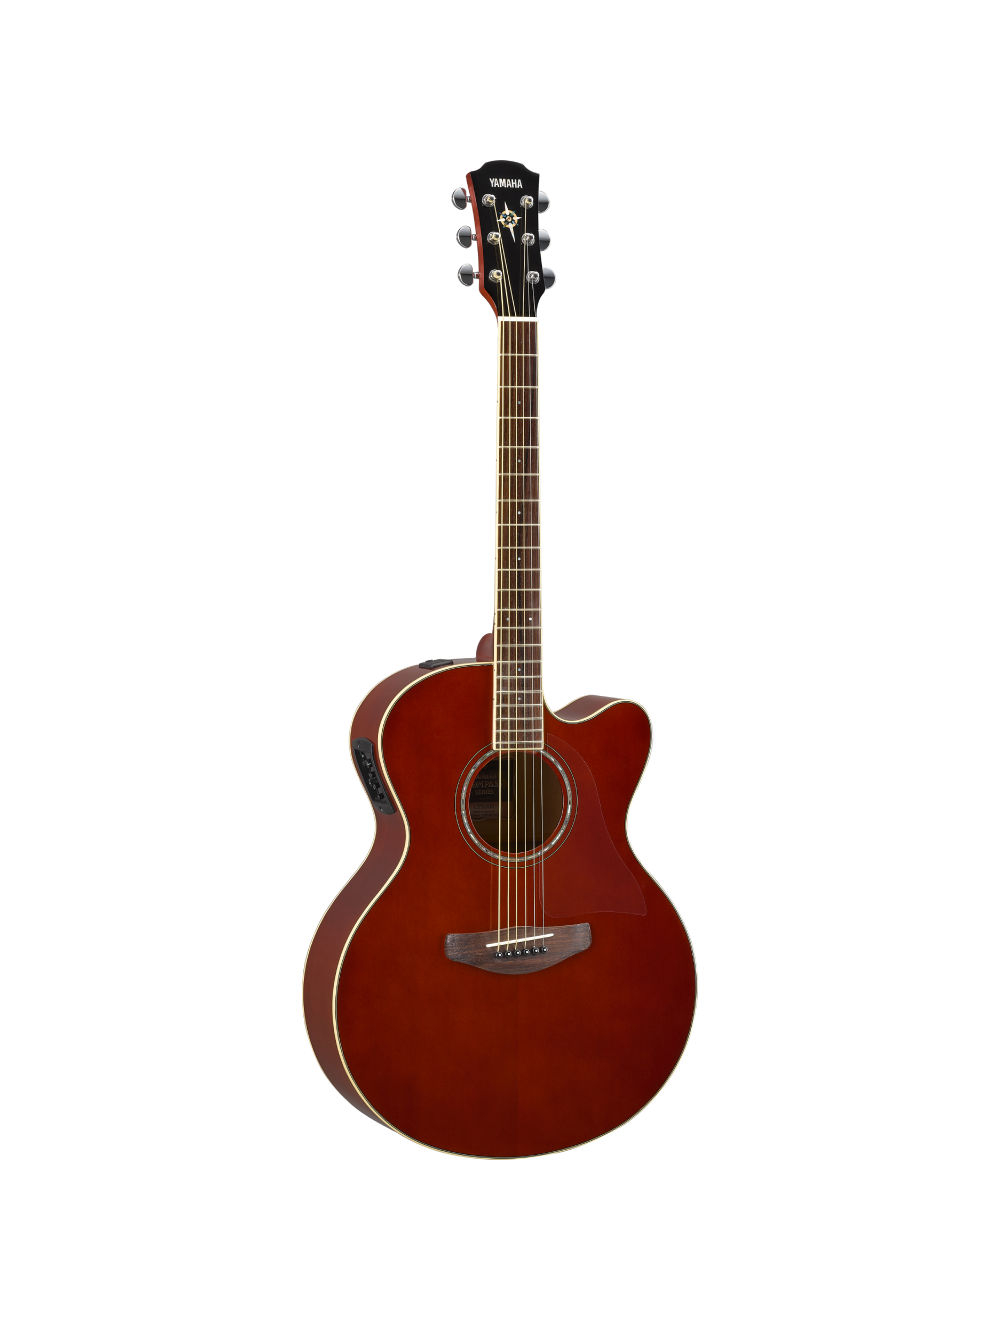 Buy online Yamaha CPX600 Root Beer Acoustic Guitar | Yamaha Music India